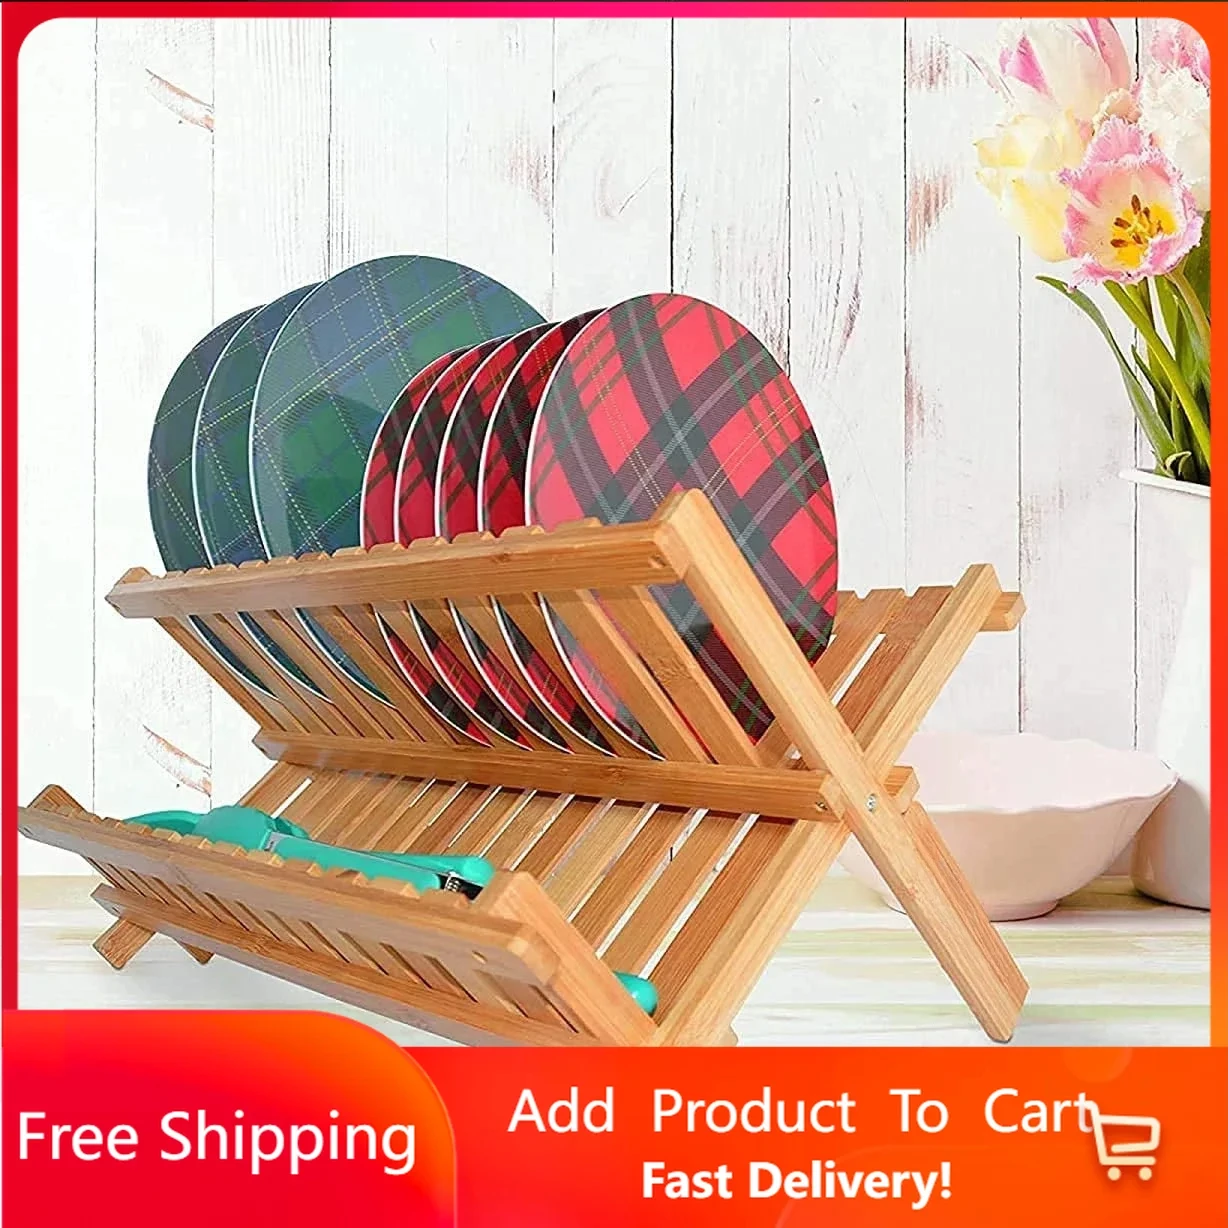 

2 Tier Dish Drying Rack -Collapsible Dish Drainer Rack and Best Dish Holder for Kitchen Countertop,Kitchen Accessories Organizer